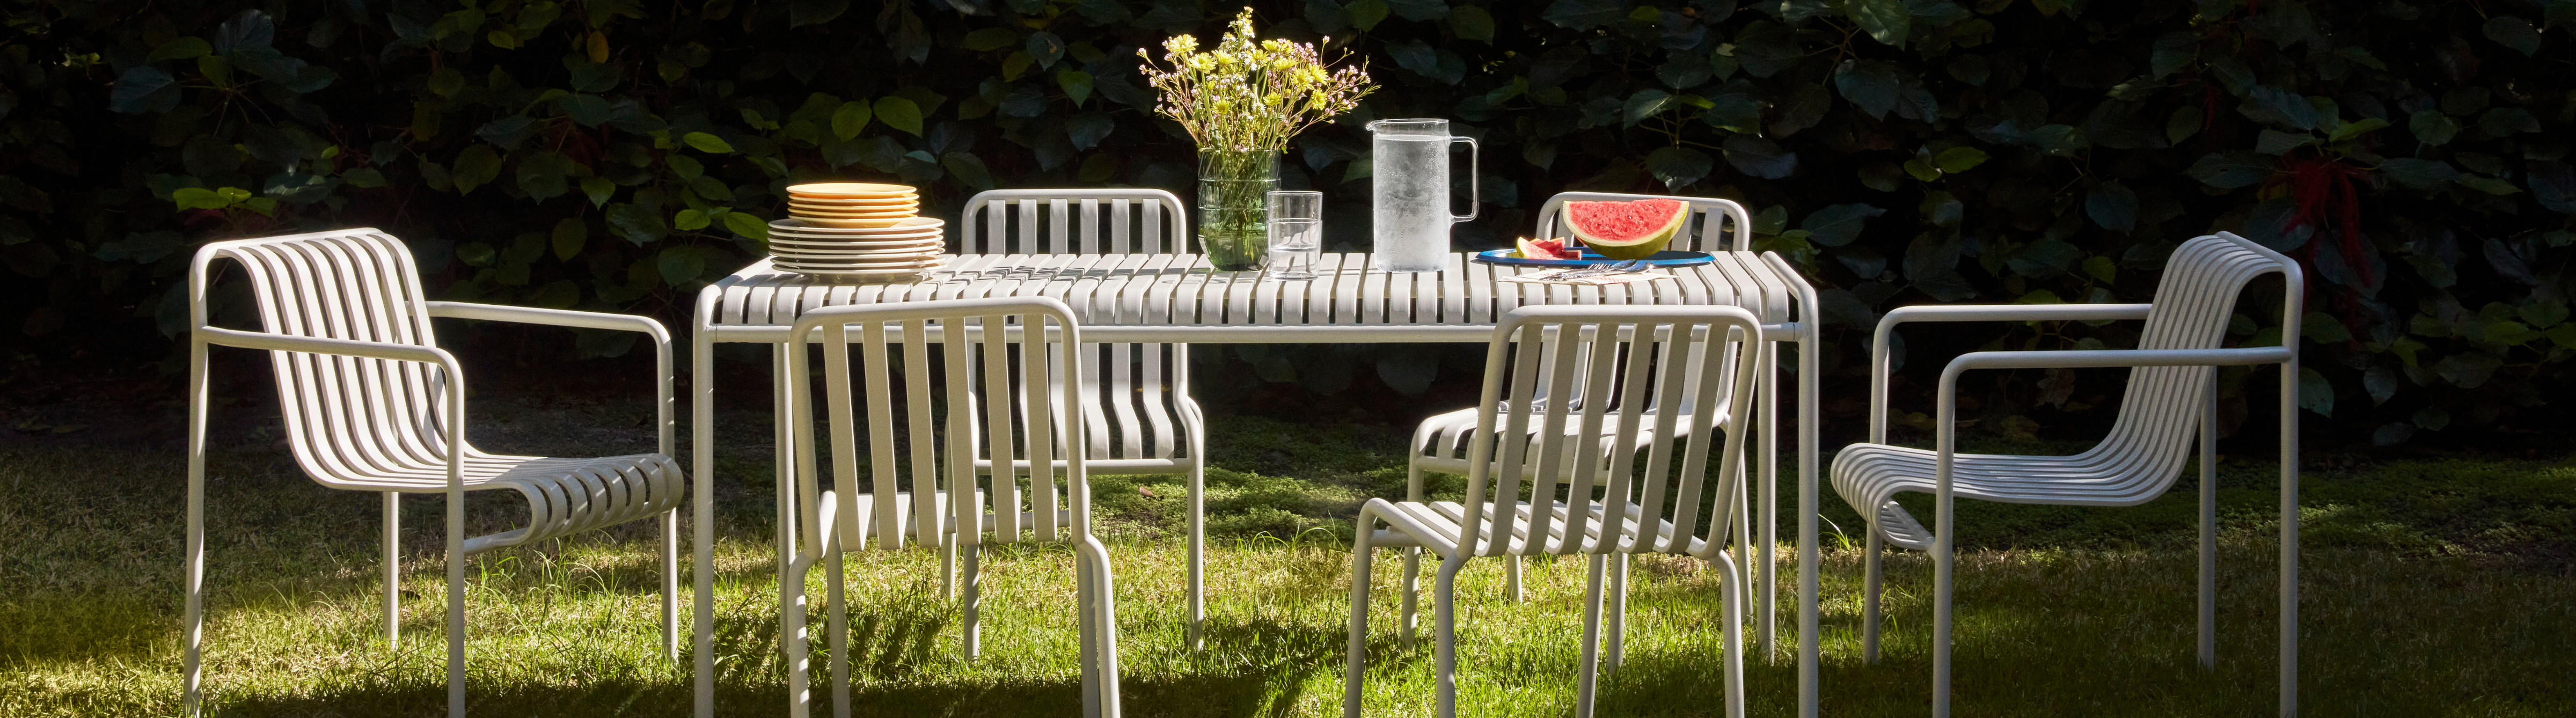 Explore bestsellers for your outdoor area